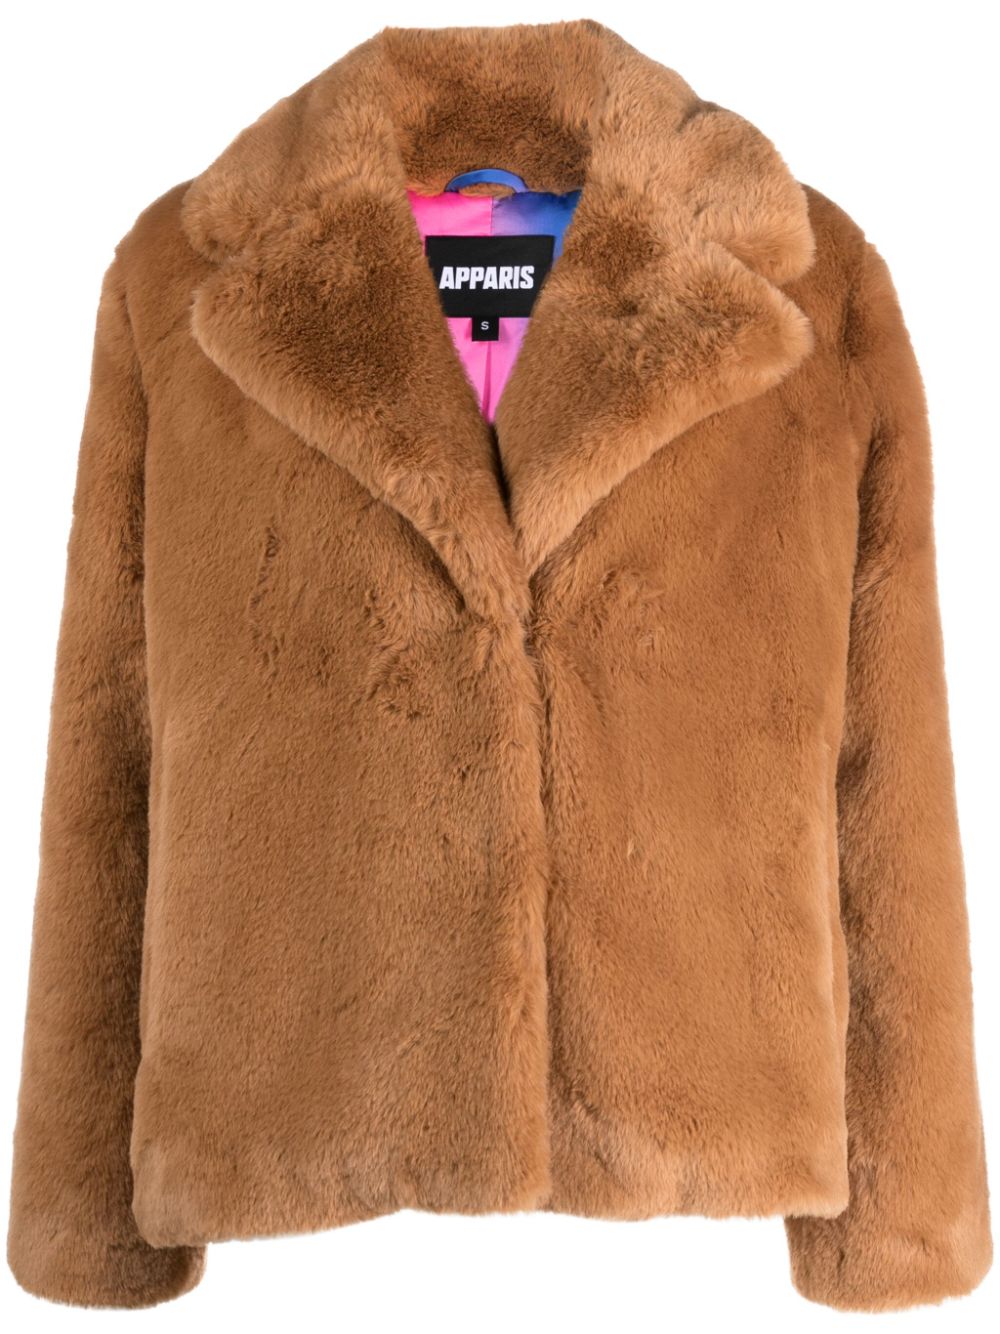 APPARIS SINGLE-BREASTED FAUX-SHEARLING JACKET